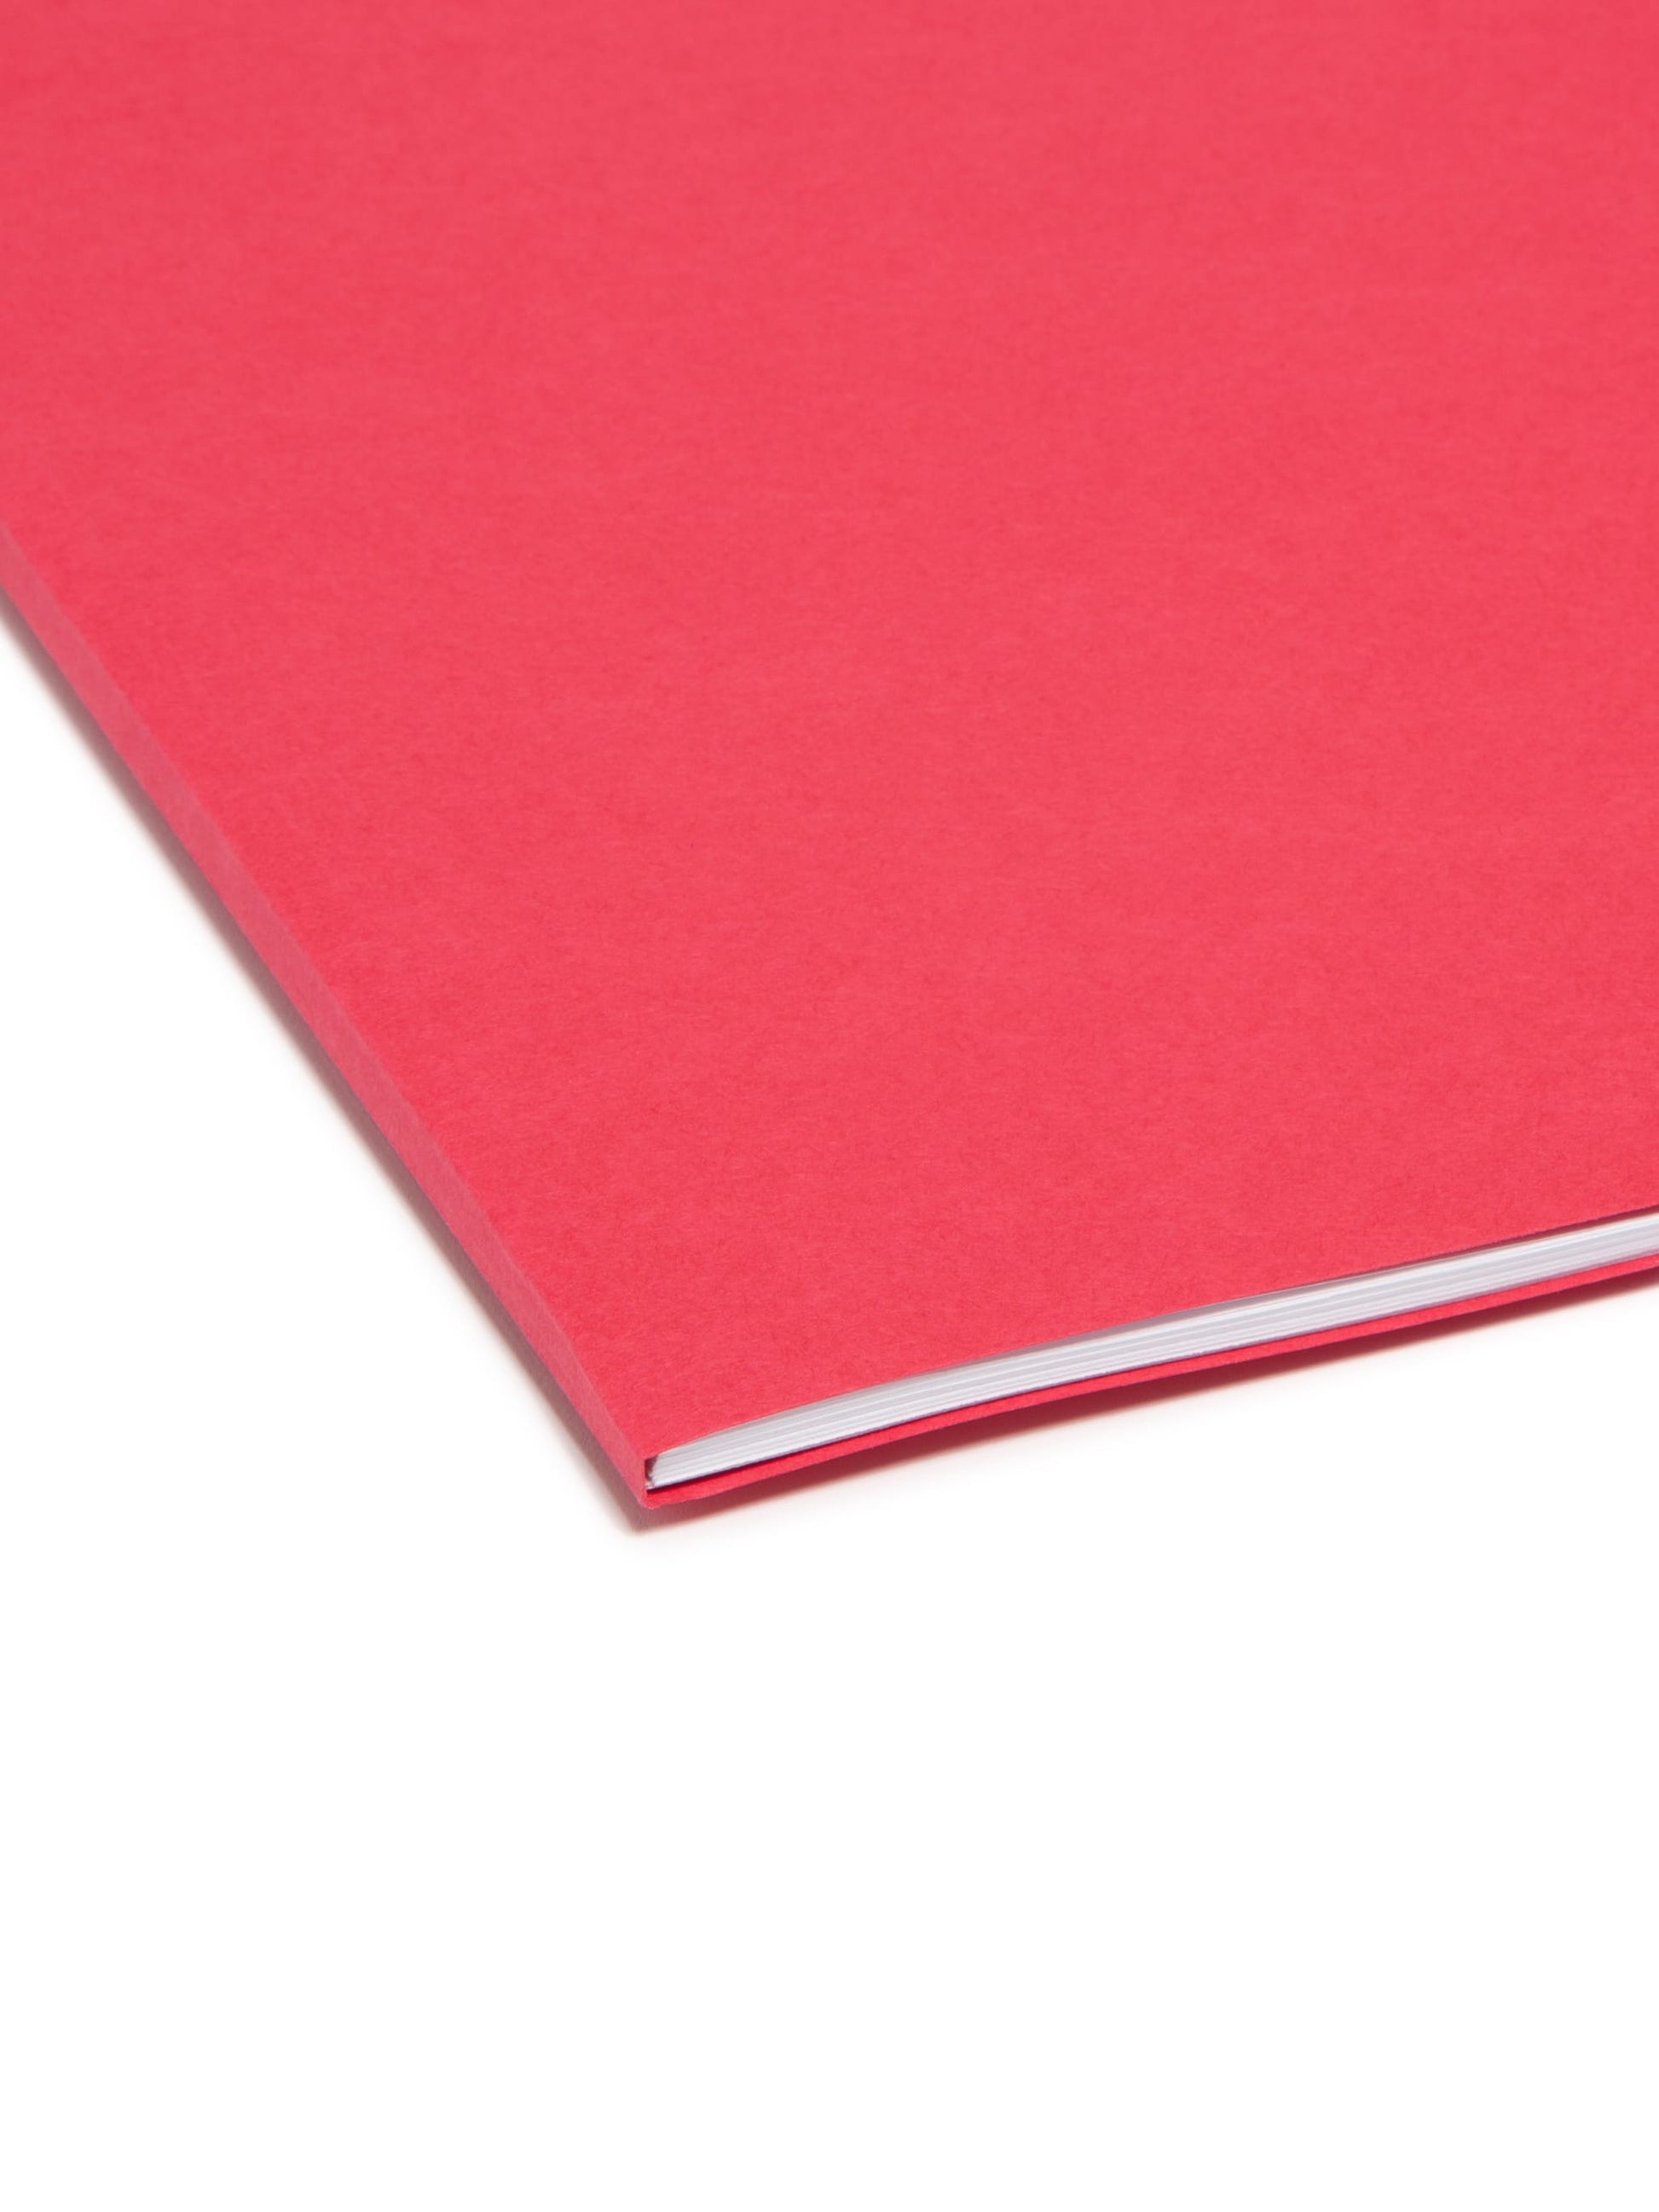 Standard File Folders, 1/3-Cut Tab, Red Color, Legal Size, Set of 100, 086486177436